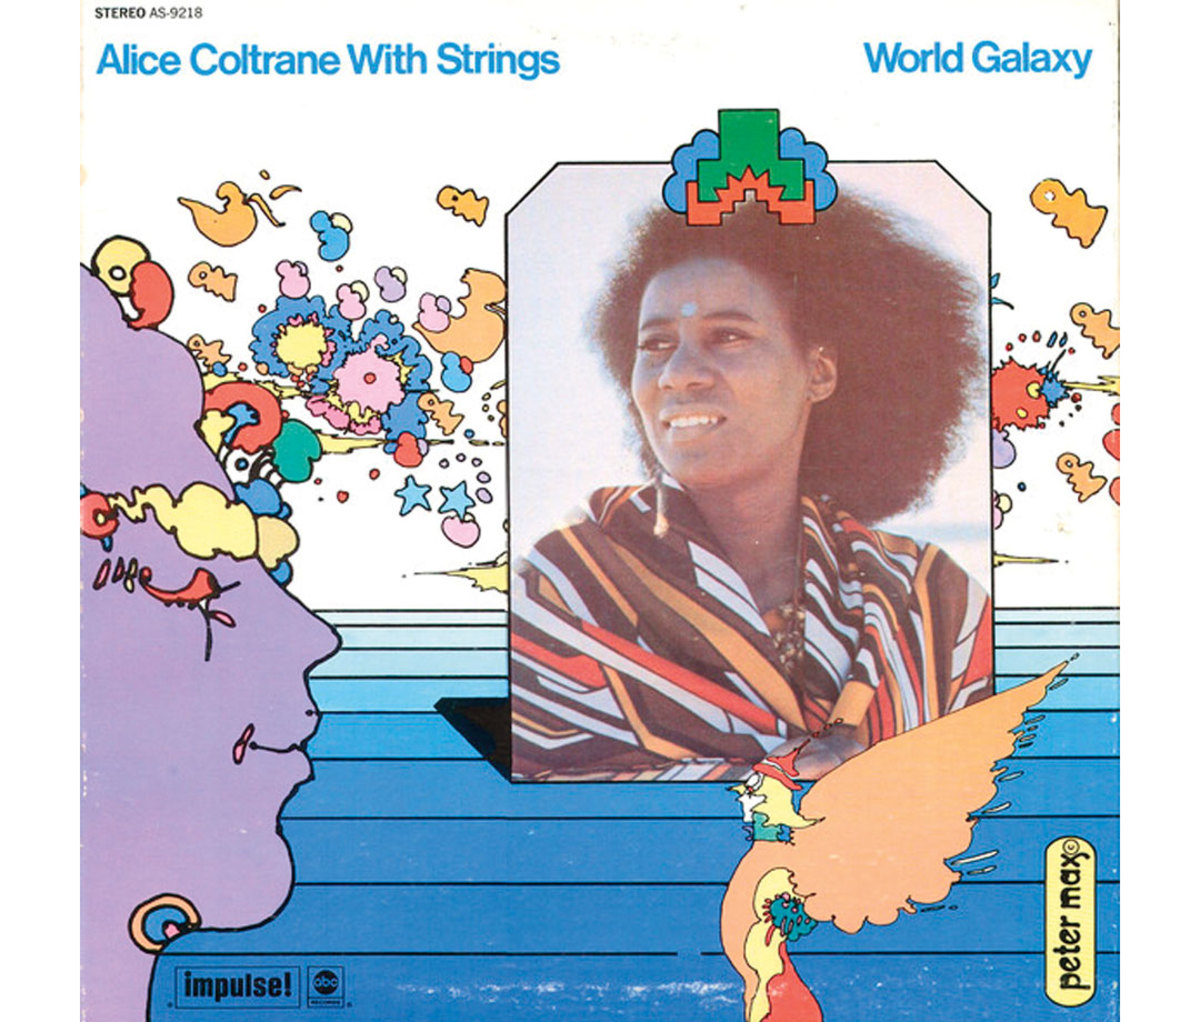 Peter Max's painted cover of 'World Galaxy' by Alice Coltrane